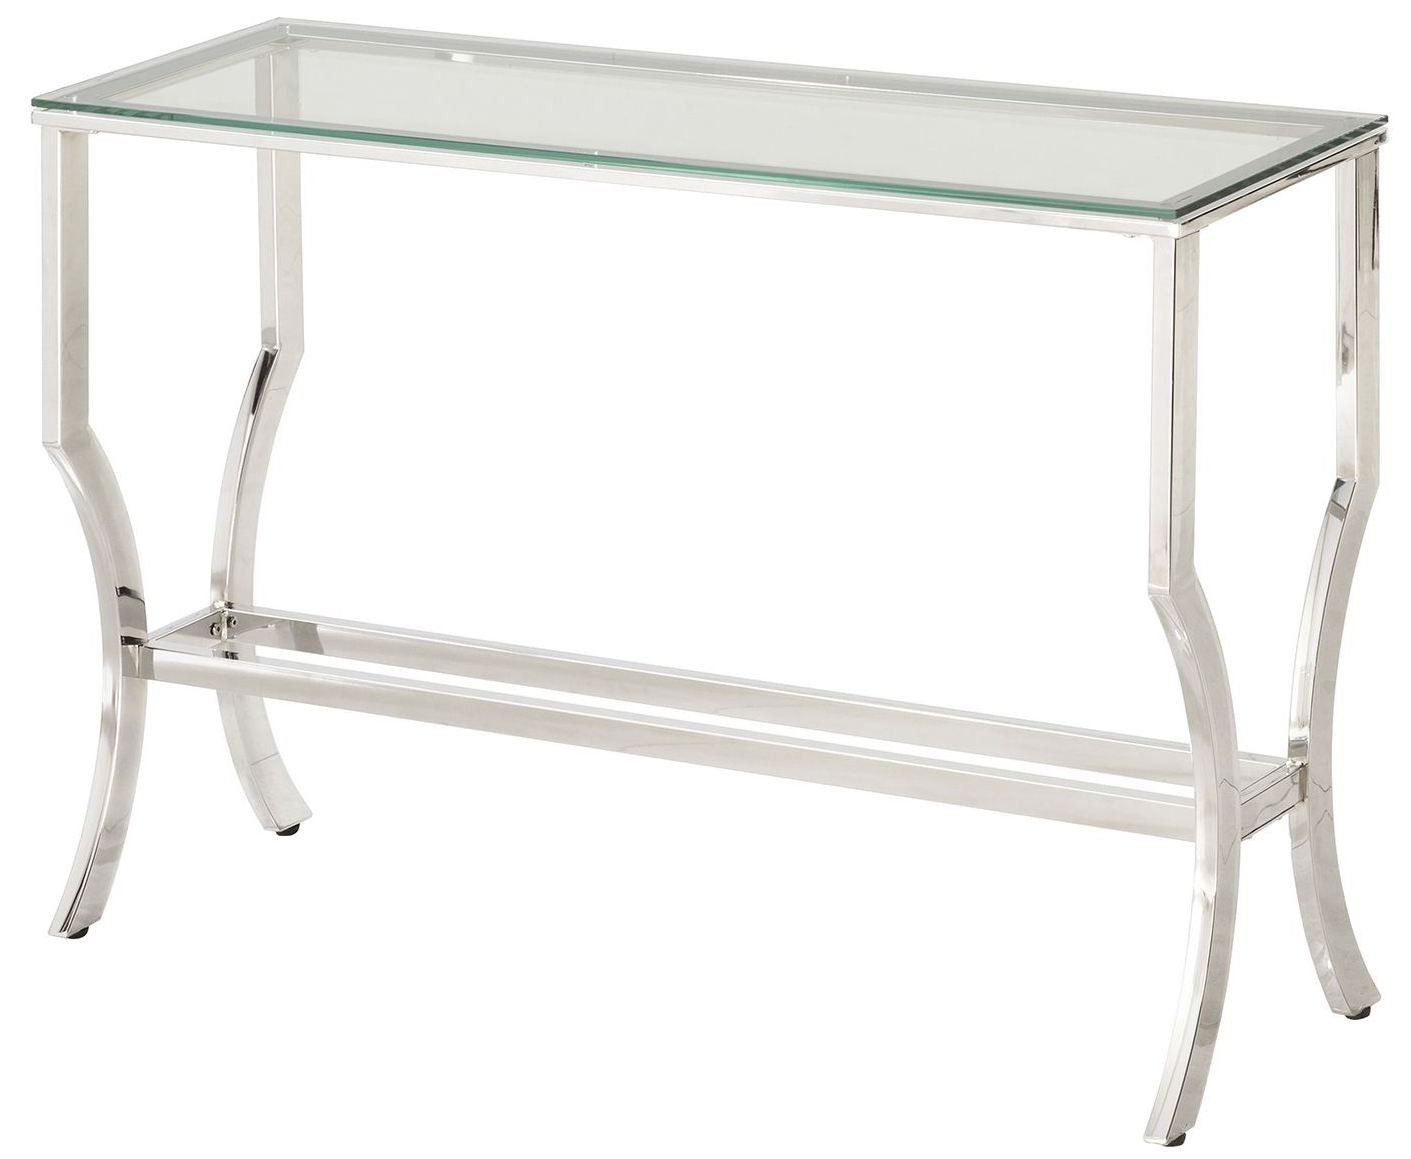 Chrome And Tempered Glass Sofa Table From Coaster Regarding Chrome And Glass Rectangular Console Tables (View 11 of 20)